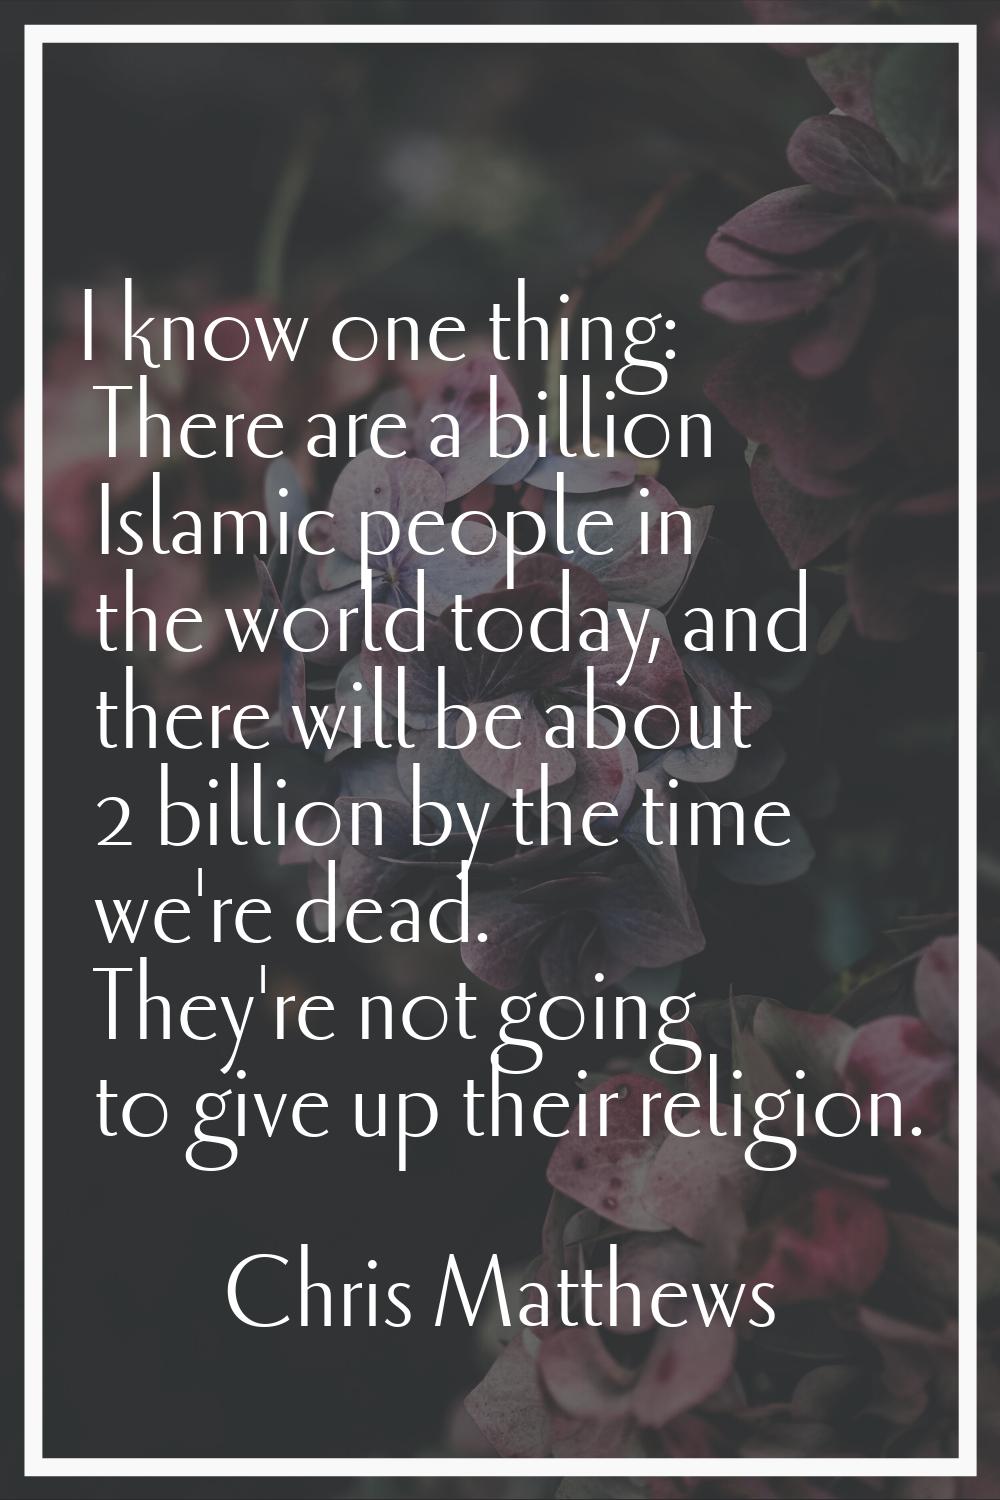 I know one thing: There are a billion Islamic people in the world today, and there will be about 2 